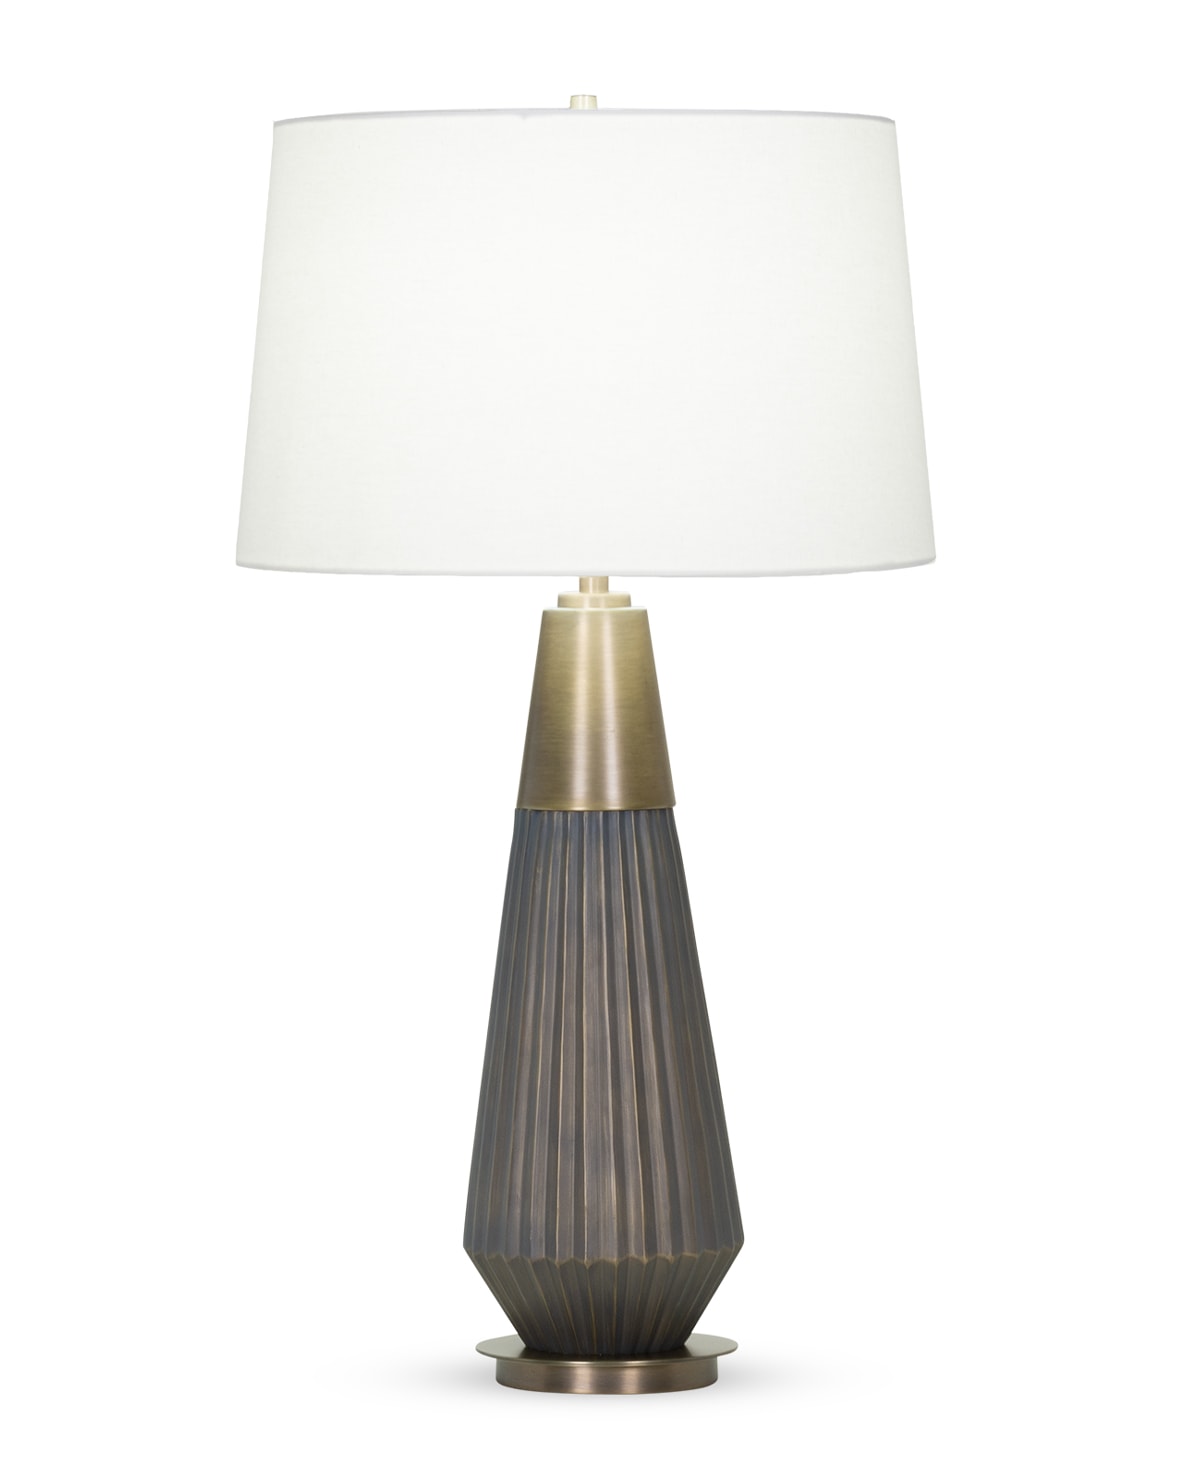 FlowDecor Helena Table Lamp in resin with bronze with brass highlights and metal with antique brass finish and off-white linen tapered drum shade (# 4404)